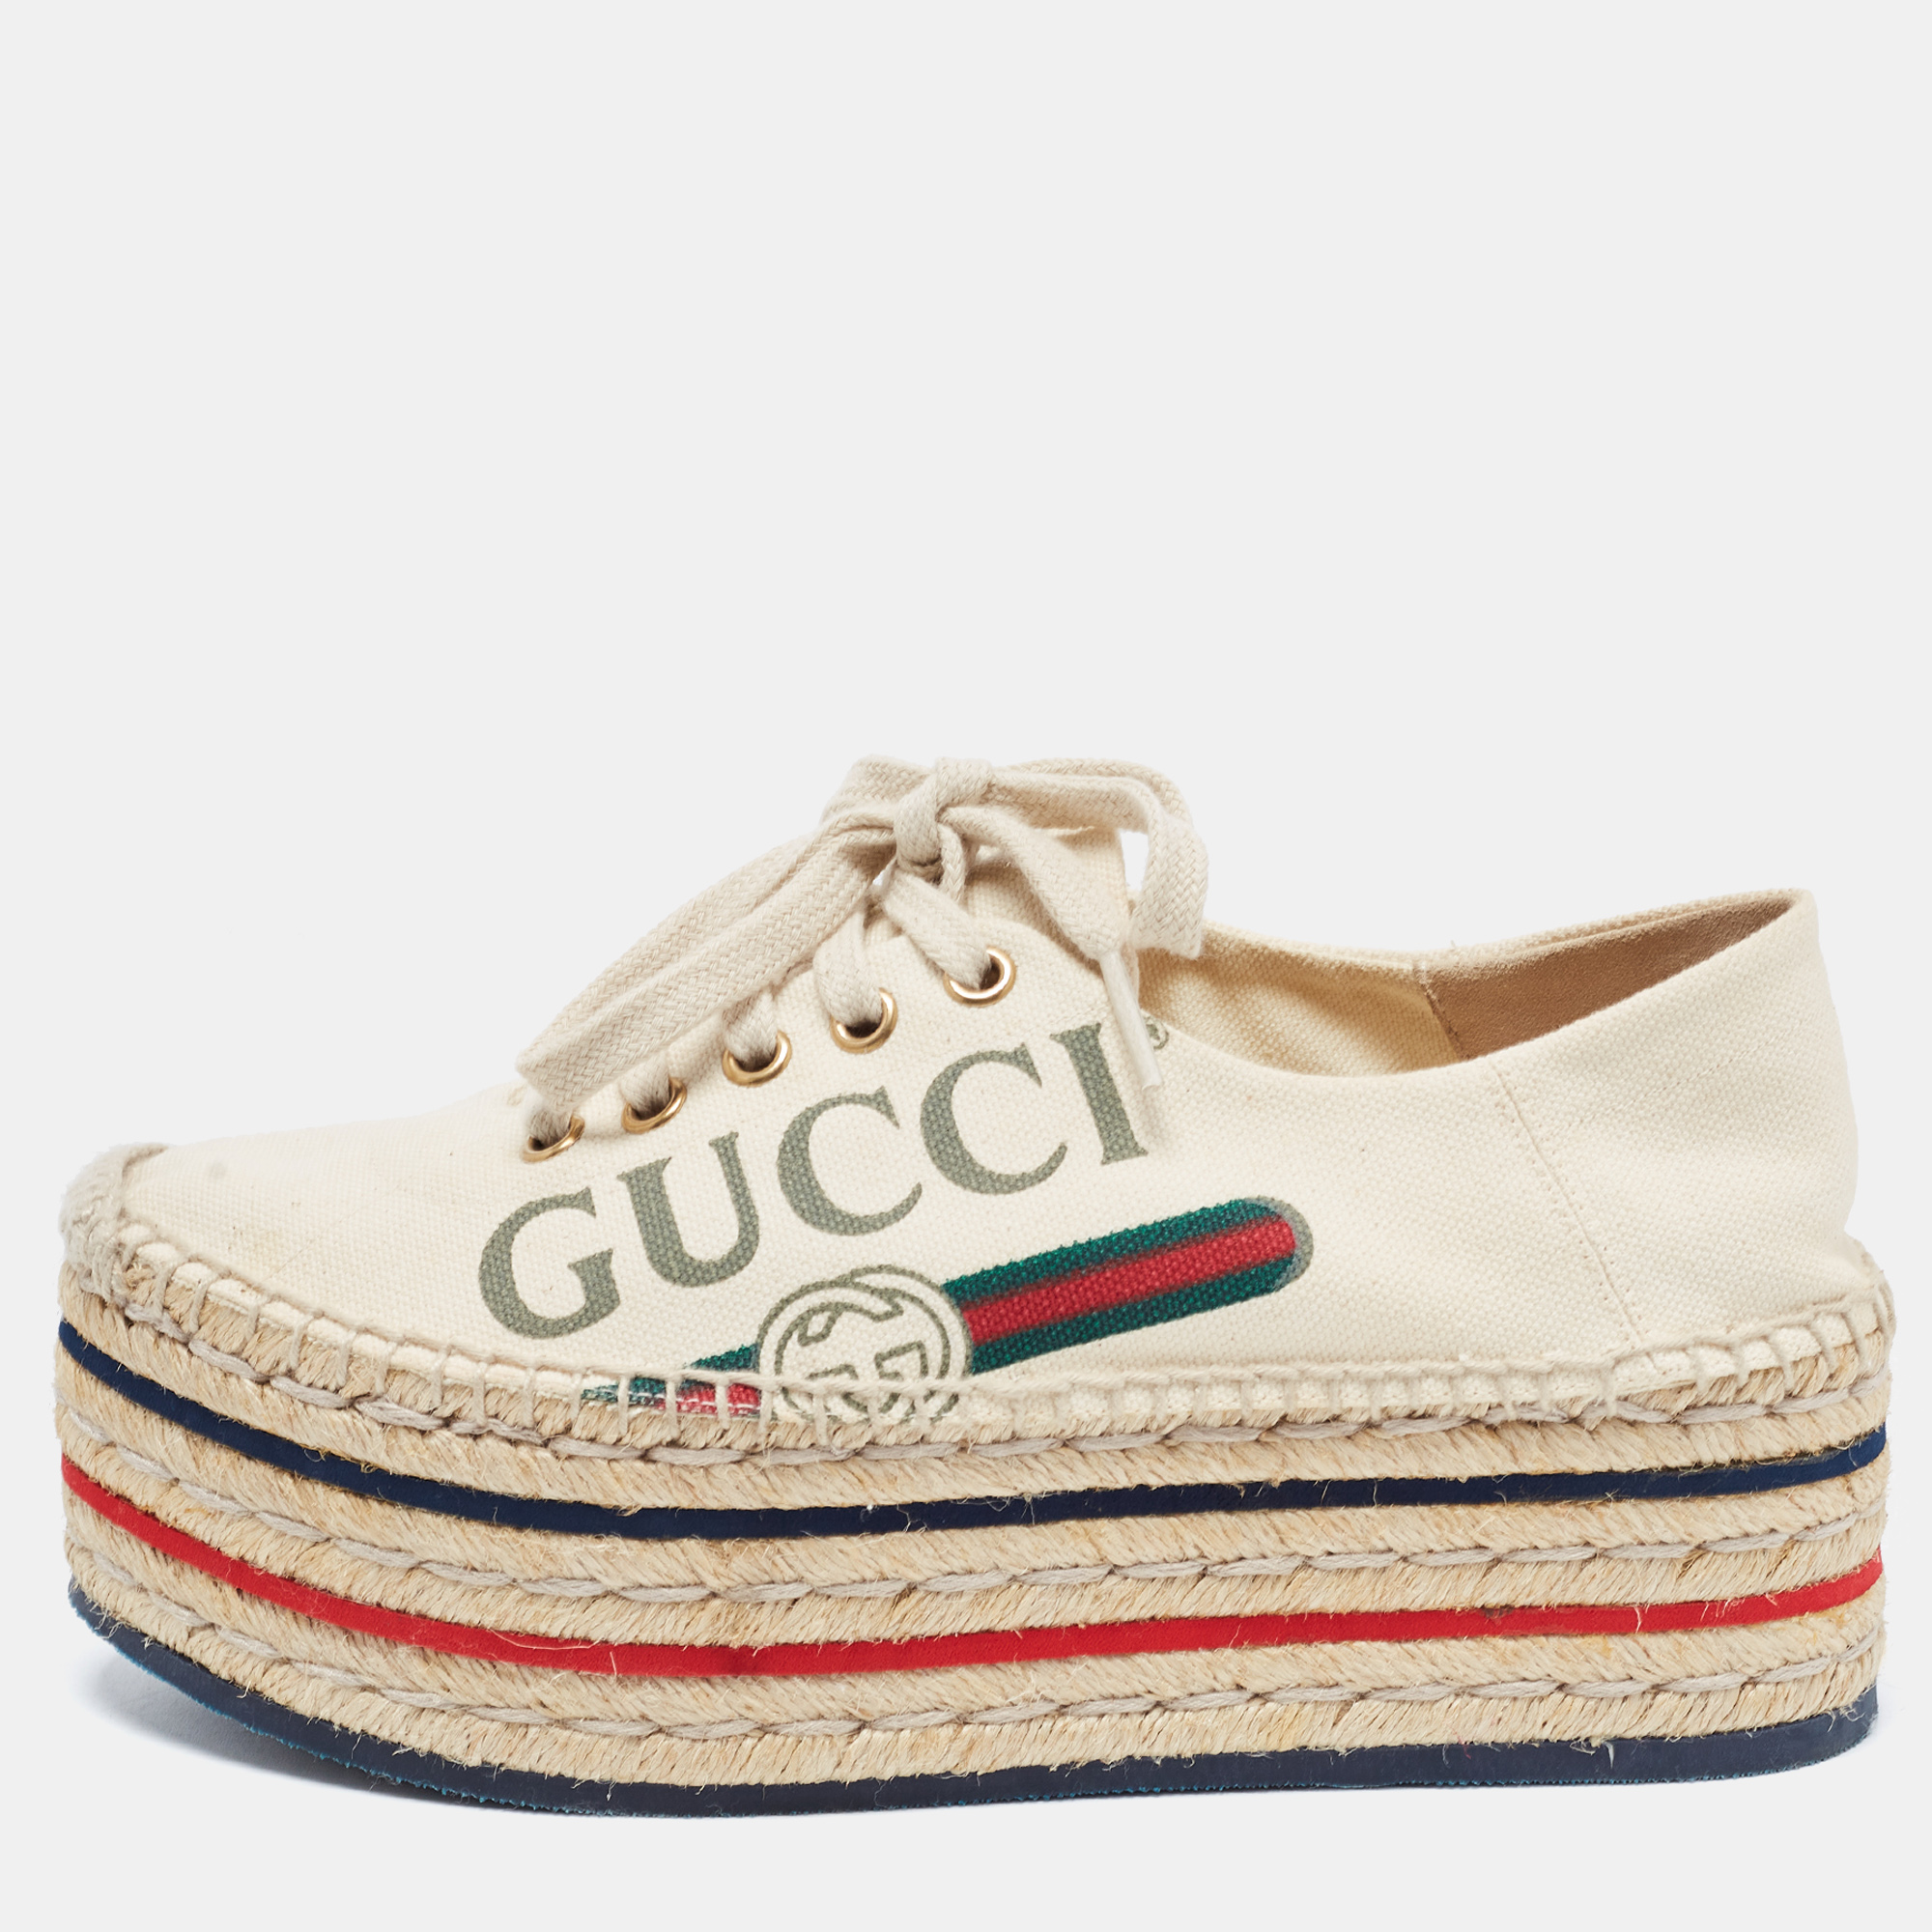 Pre-owned Gucci Cream Canvas Lilibeth Espadrille Platform Sneakers Size 35.5